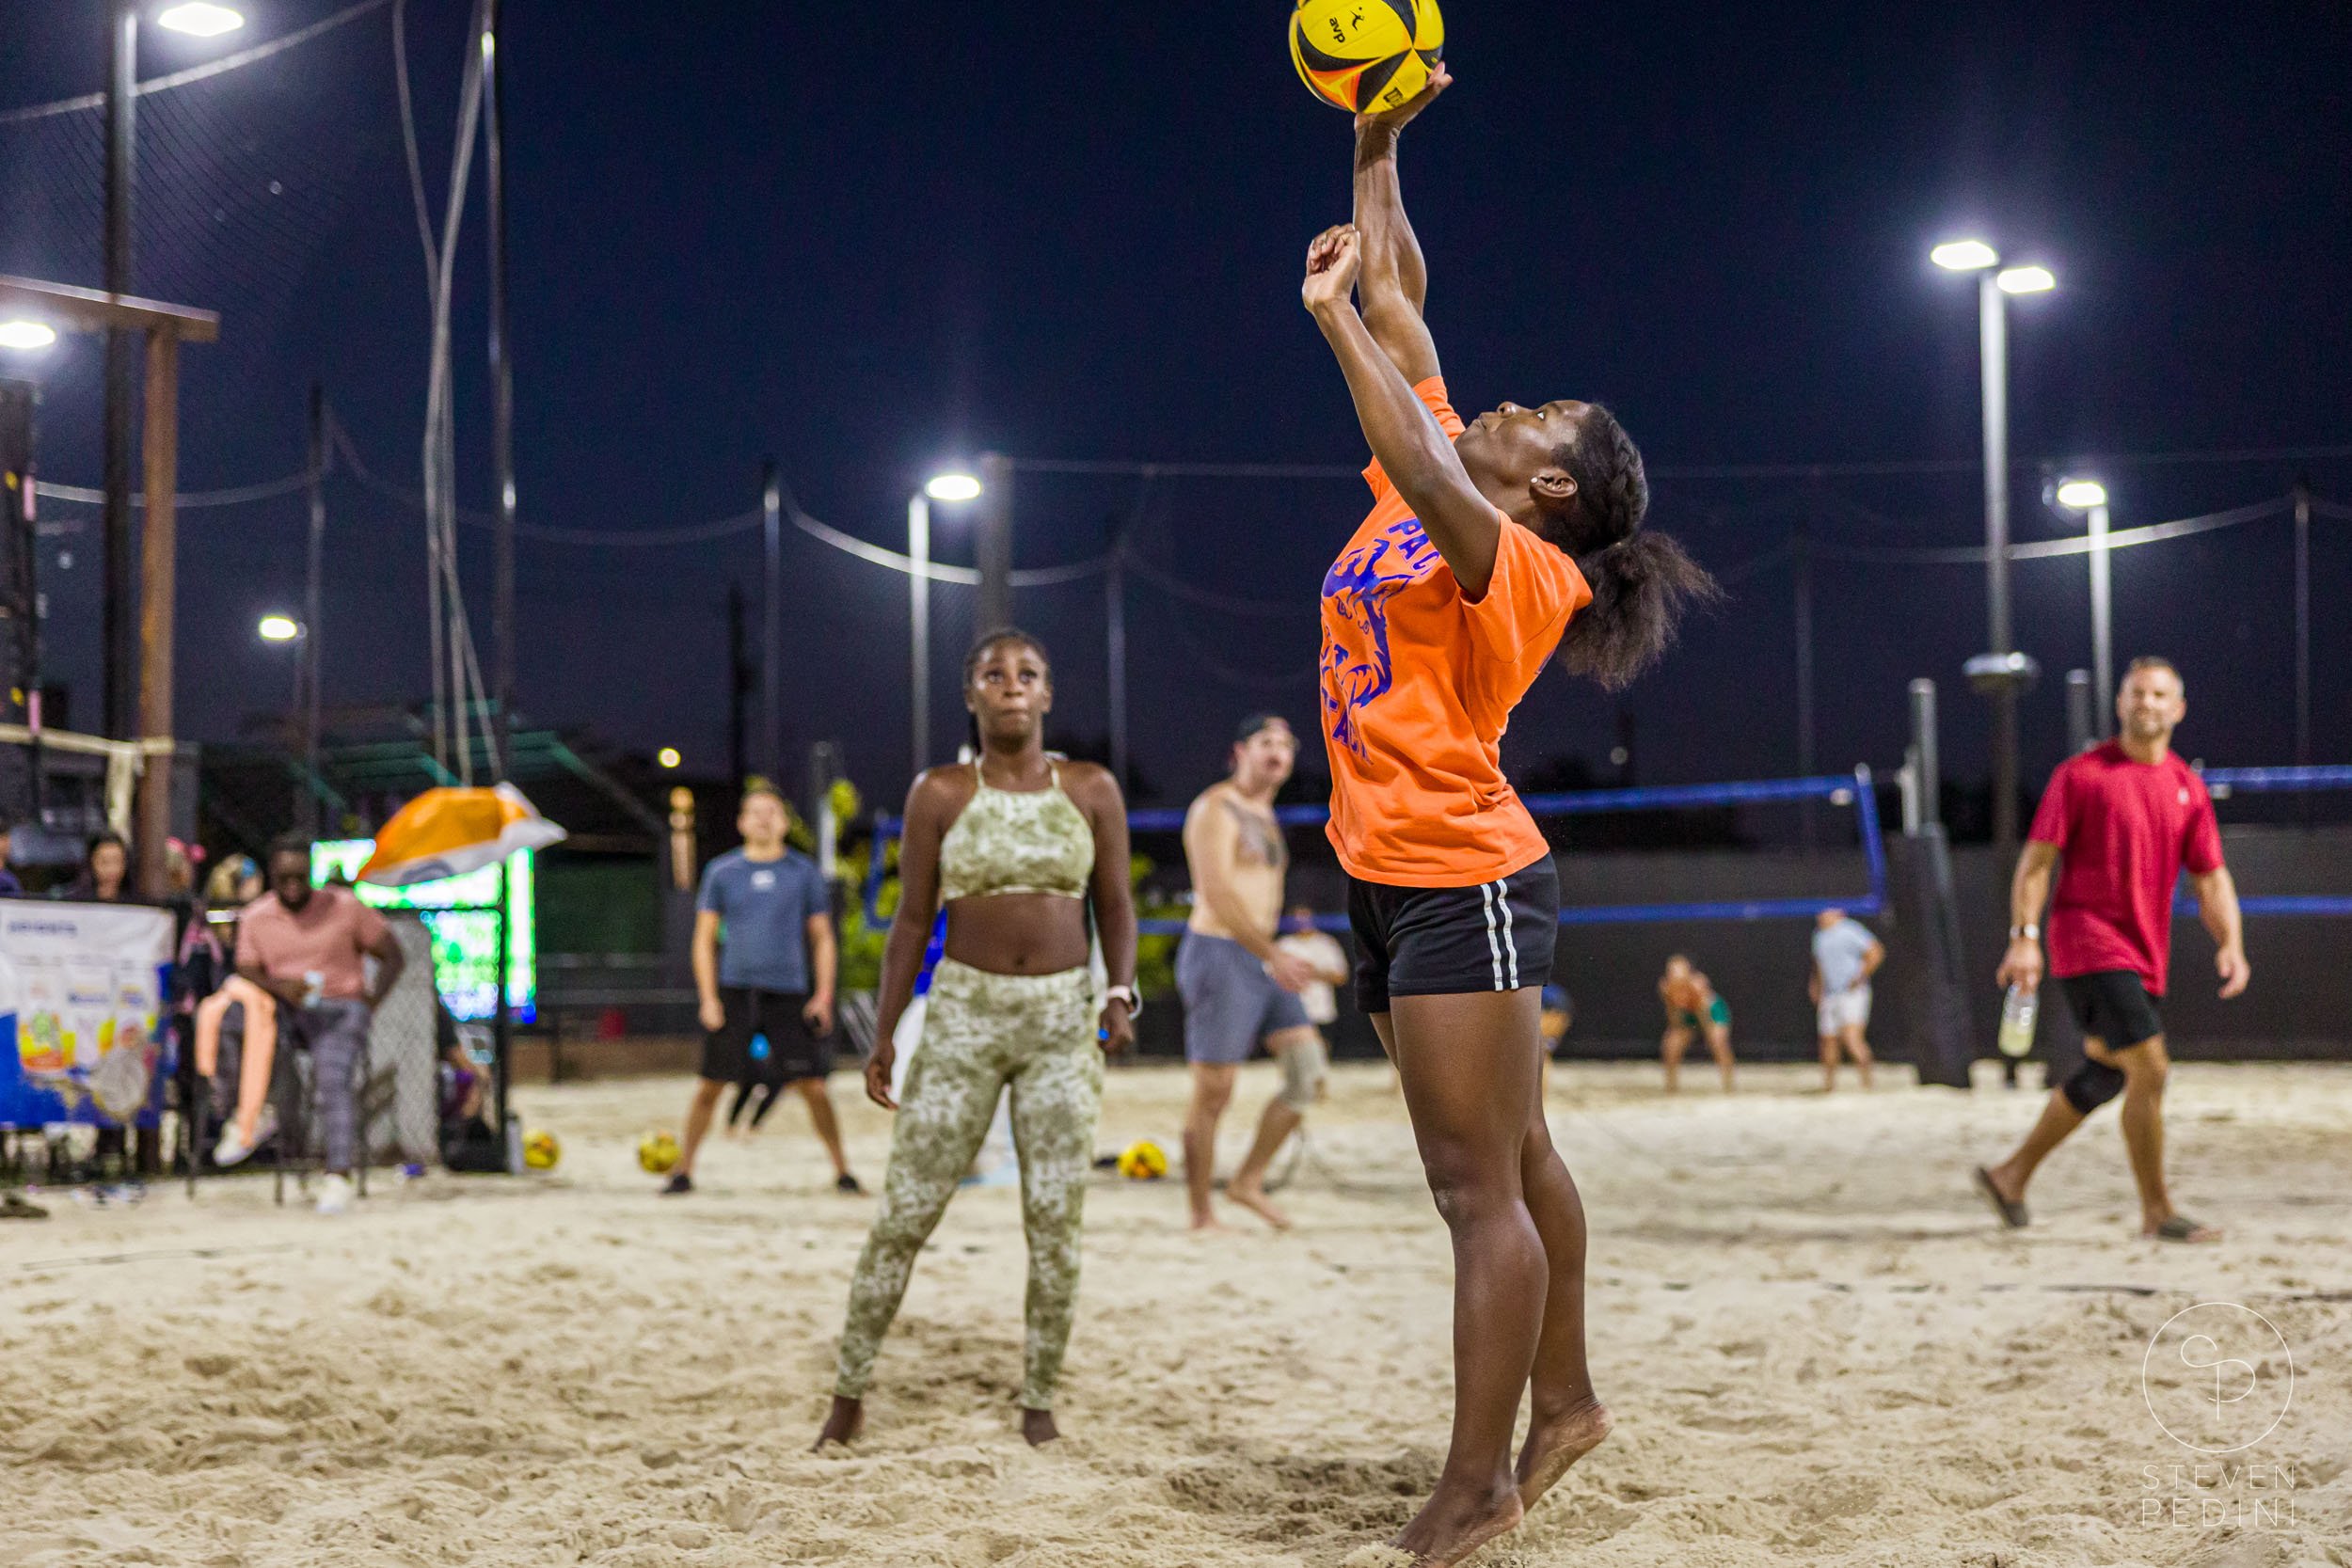 Steven Pedini Photography - Bumpy Pickle - Sand Volleyball - Houston TX - World Cup of Volleyball - 00346.jpg